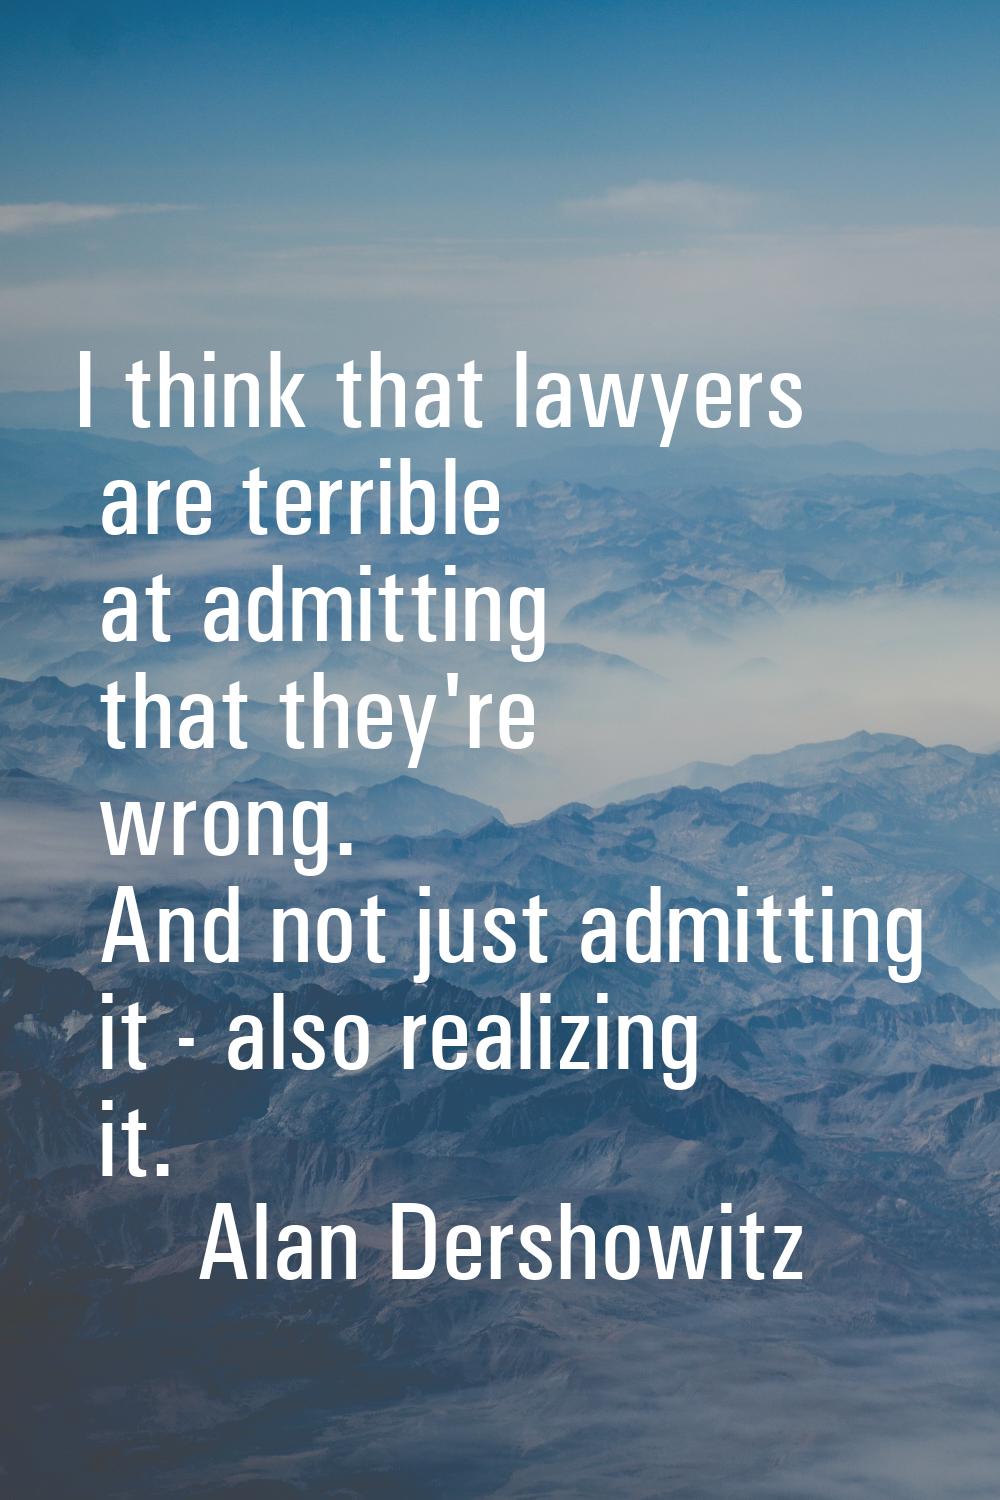 I think that lawyers are terrible at admitting that they're wrong. And not just admitting it - also